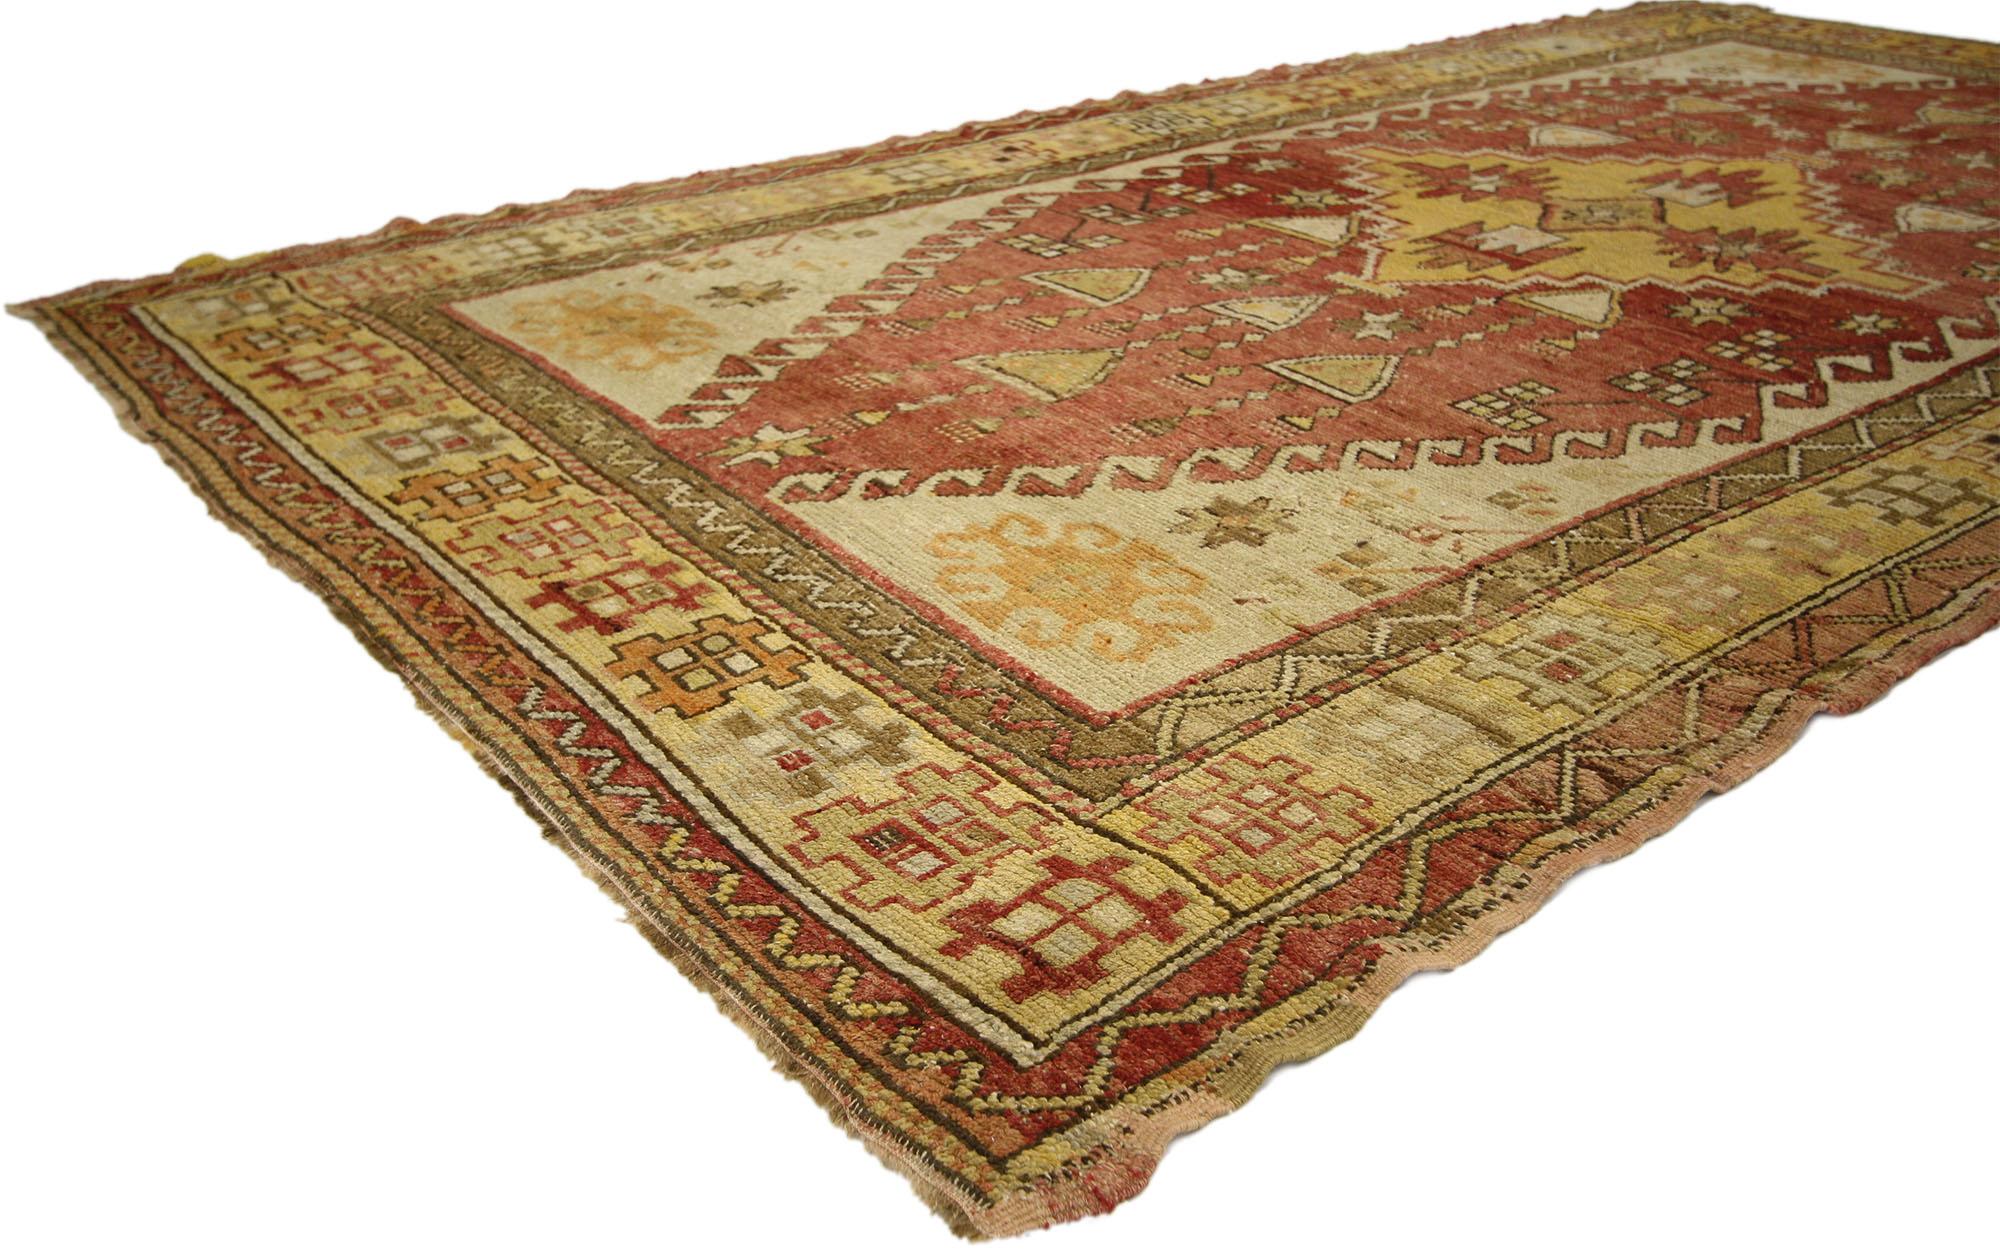 73937, vintage Turkish Oushak gallery rug with rustic tribal style. With warm terracotta hues and rustic sensibility, this hand knotted vintage Turkish Oushak rug is well-balanced and poised to impress. Taking central stage is a stepped diamond